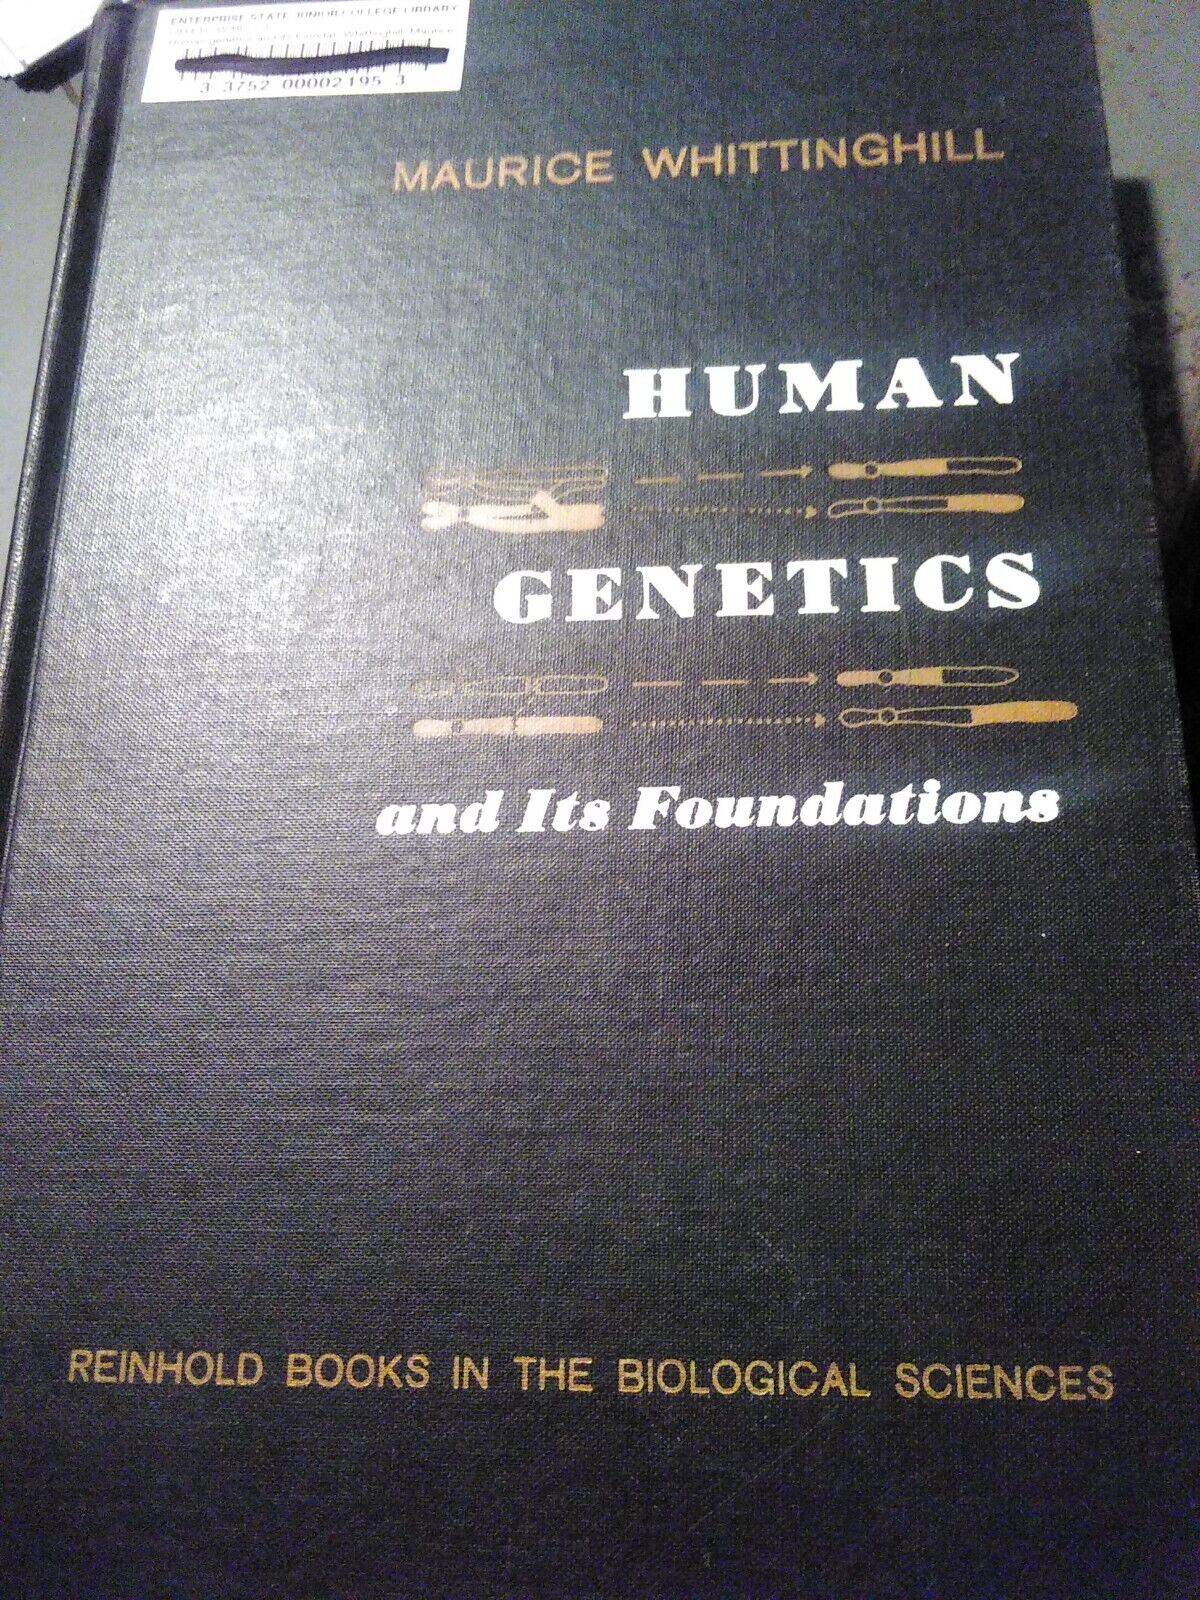 Human Genetics and its Foundations Maurice Whittinghill 1965 Hardcover Edition